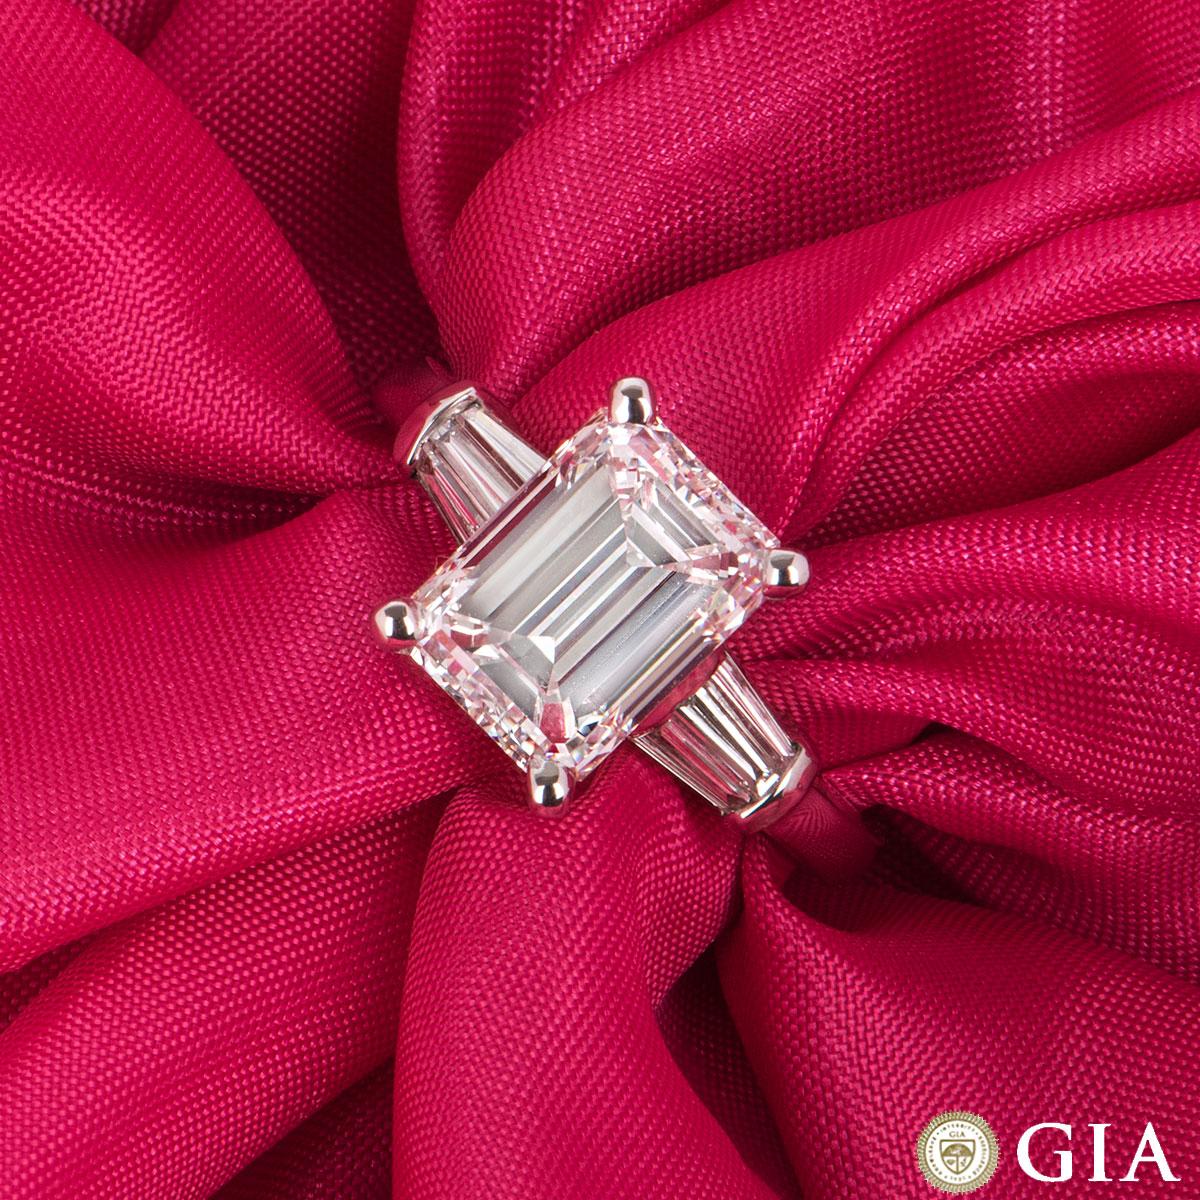 A stunning white gold emerald cut diamond ring. The emerald cut diamond is set within a four claw setting and weighs 3.02ct, G colour and VVS2 in clarity. The central diamond is flanked on either side with 3 tapered baguette cut diamonds, totalling